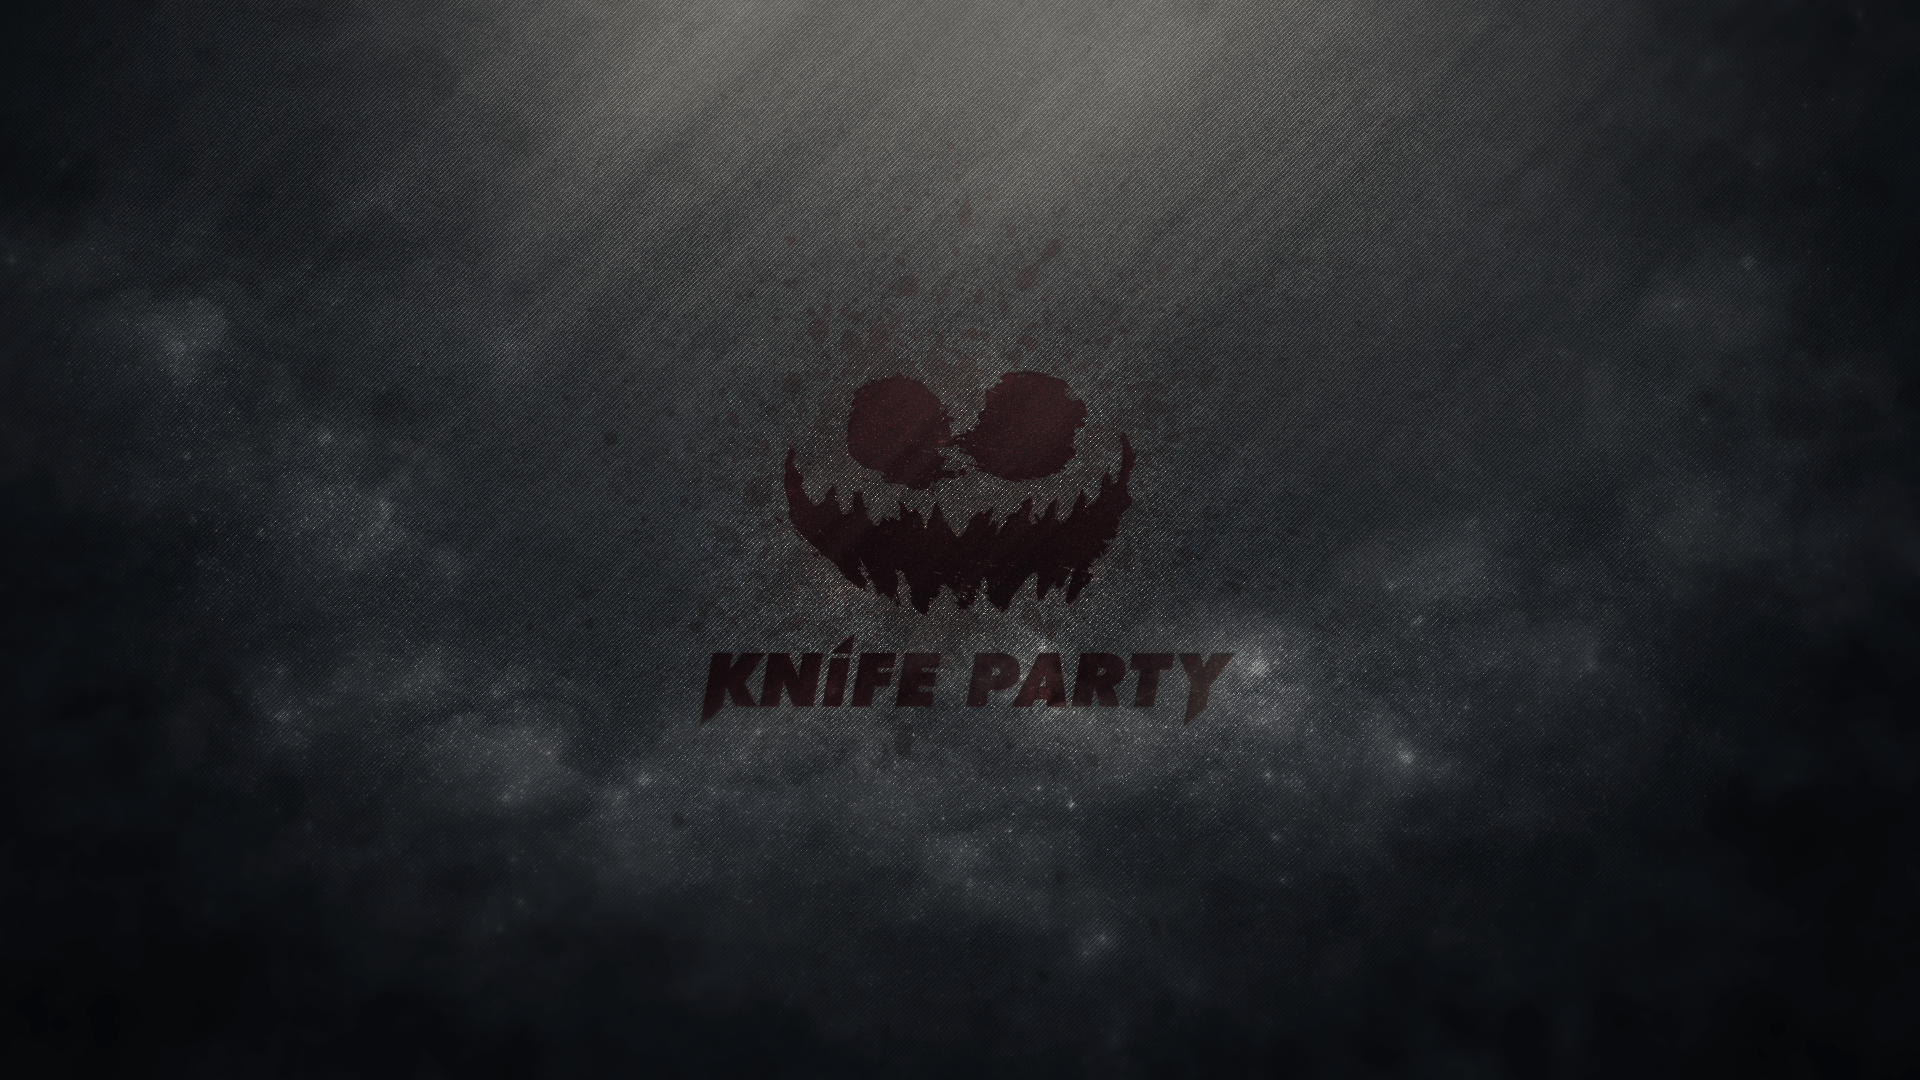 Knife Party Wallpaper, Picture